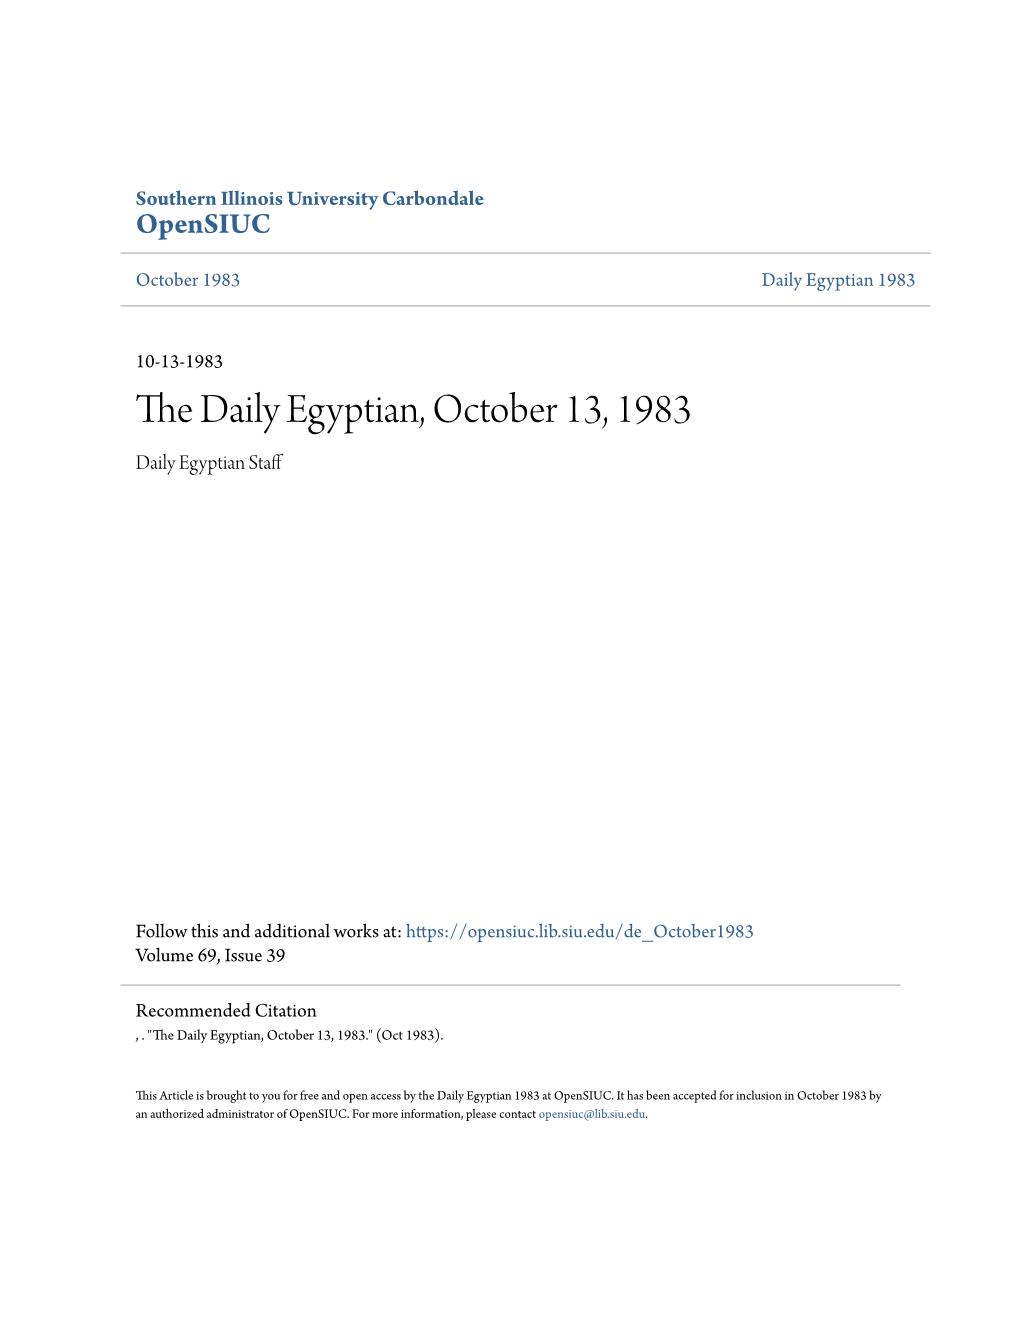 The Daily Egyptian, October 13, 1983